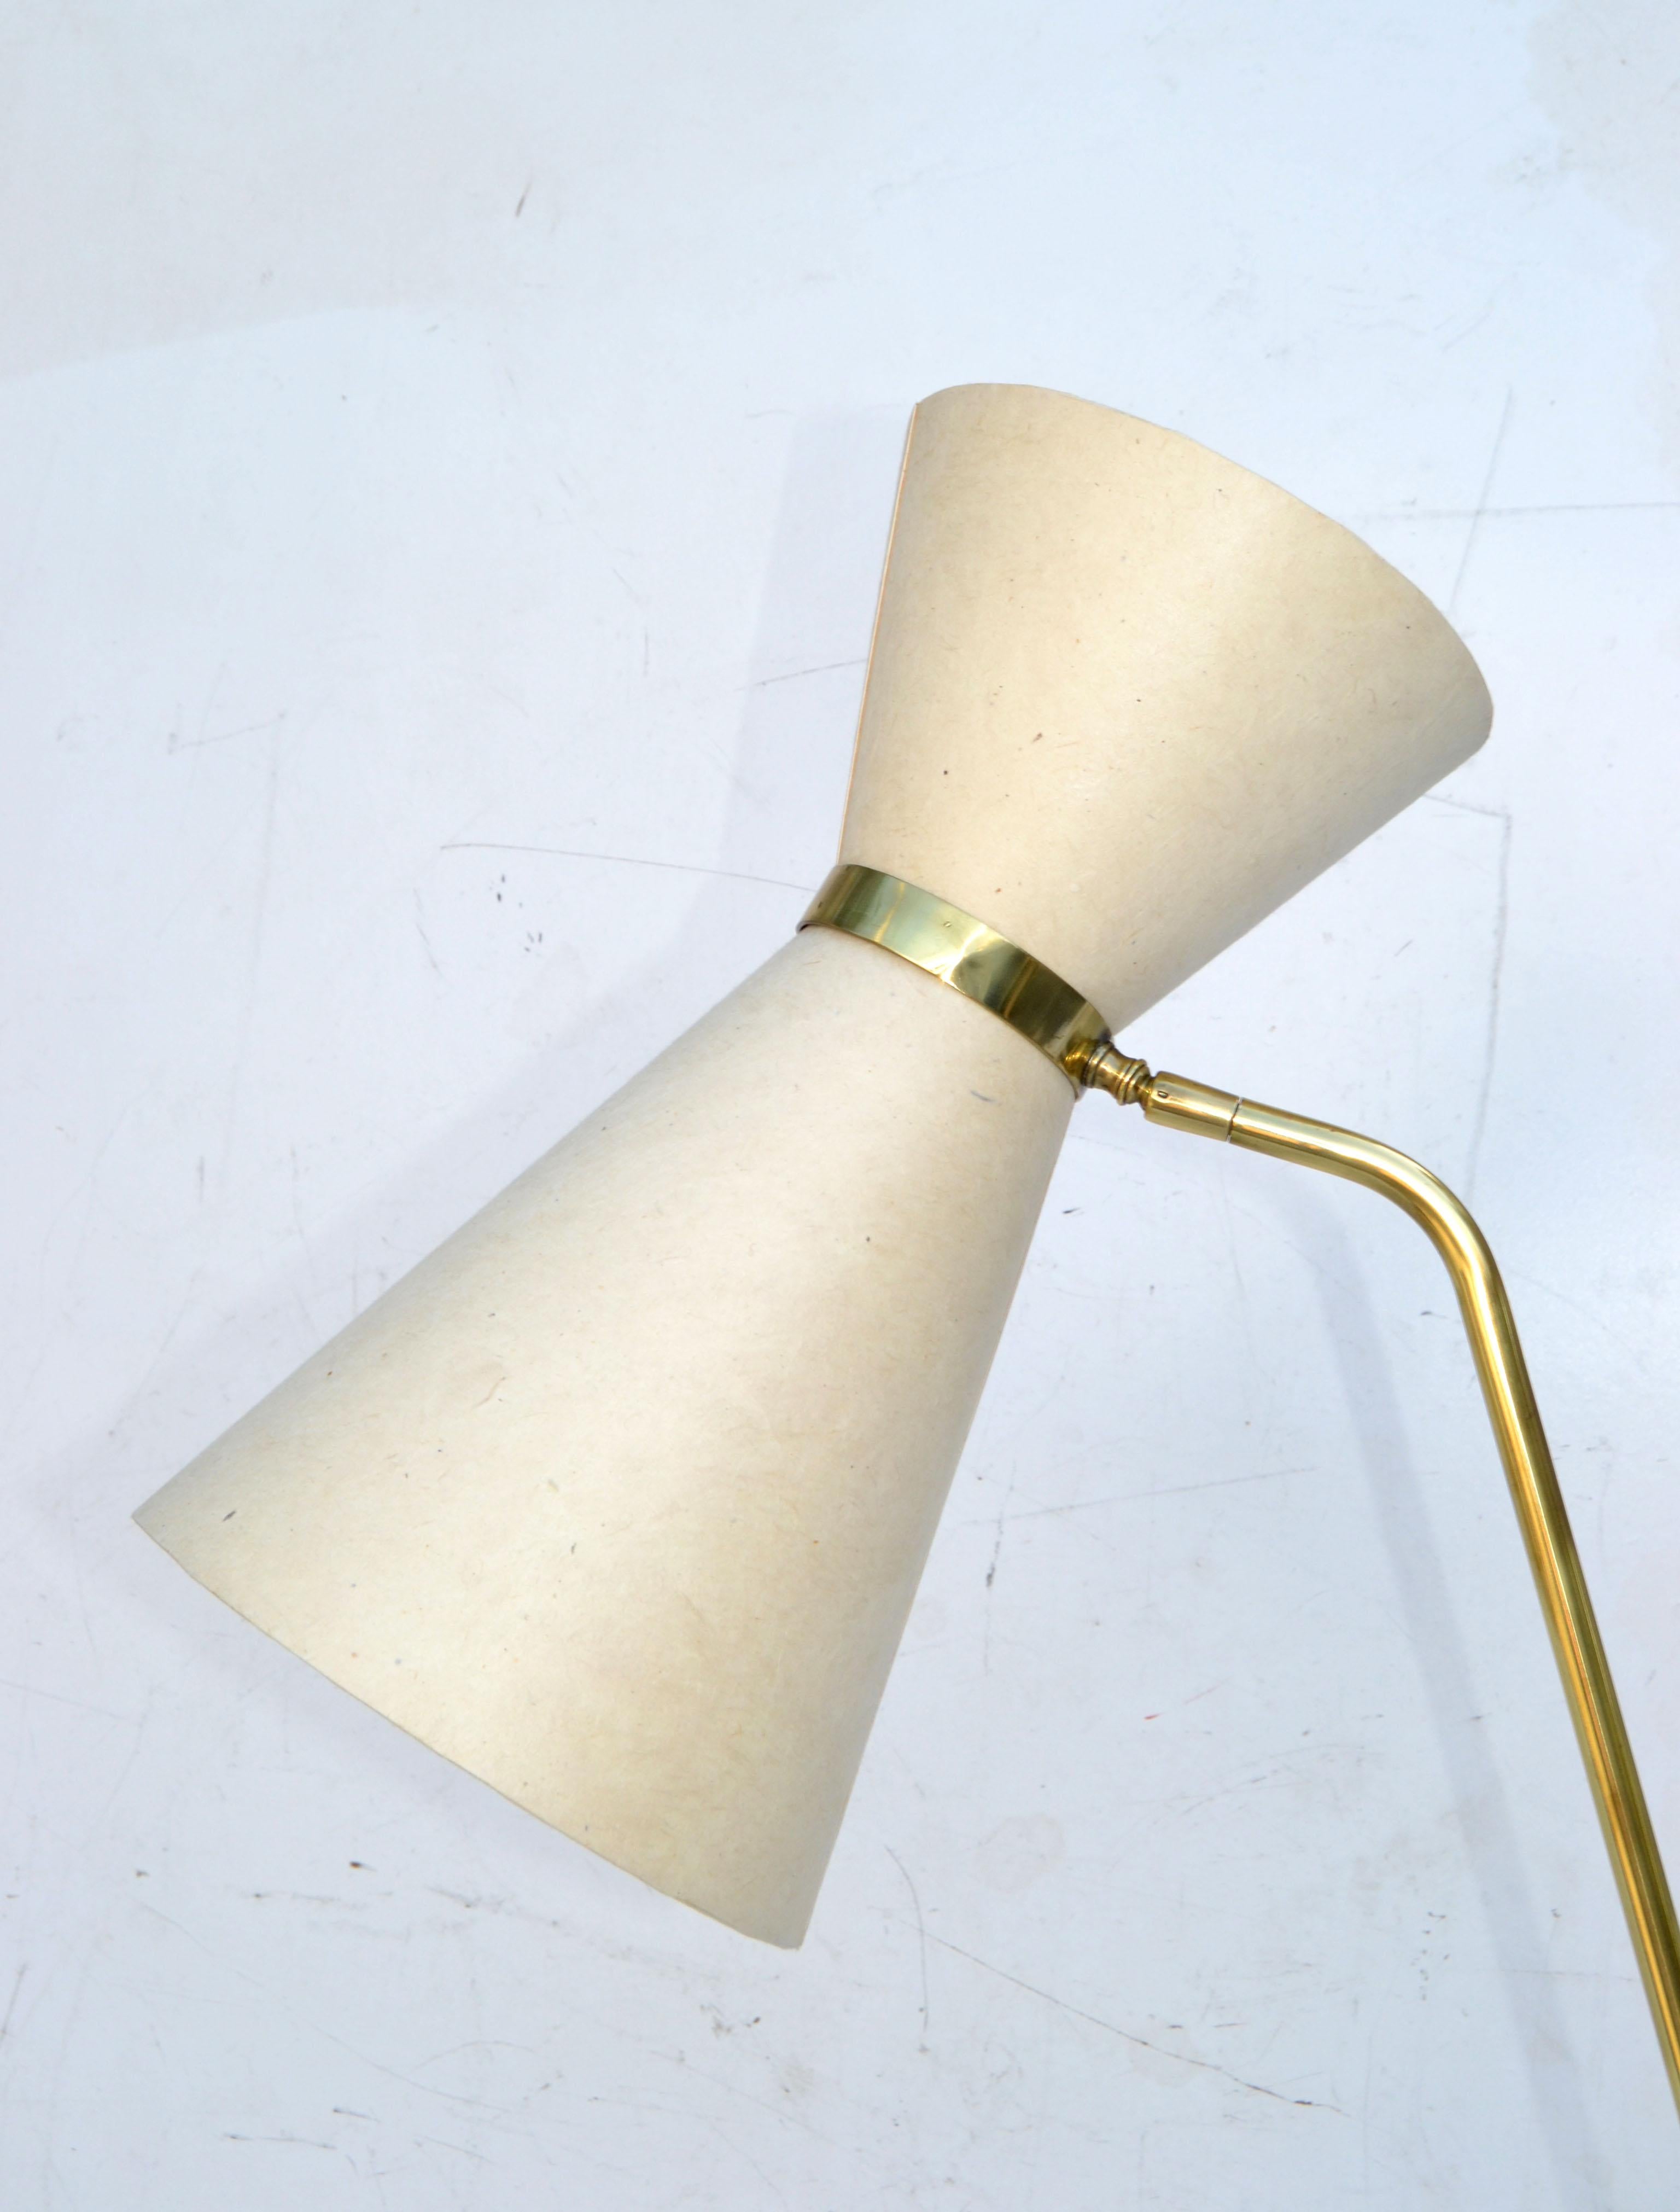 Hand-Crafted Pierre Guariche Model G2 Equilibrium Floor Lamp by Mathieu Diderot, Paris 1950 For Sale